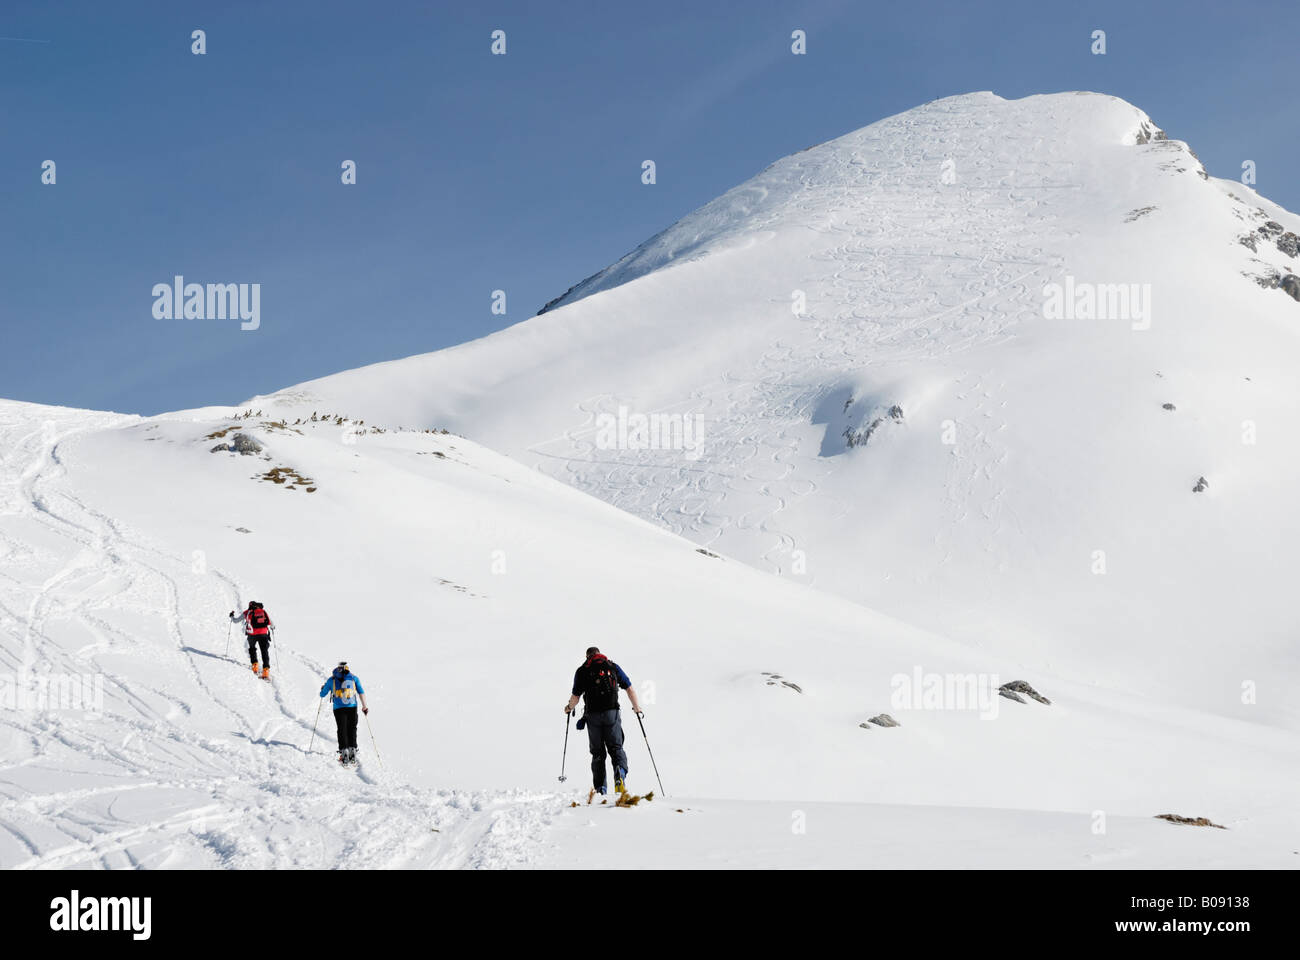 Mountaineers on touring skis crossing a snowy slope leading up to a snow-covered mountain peak laced with ski tracks, Rofan Ran Stock Photo